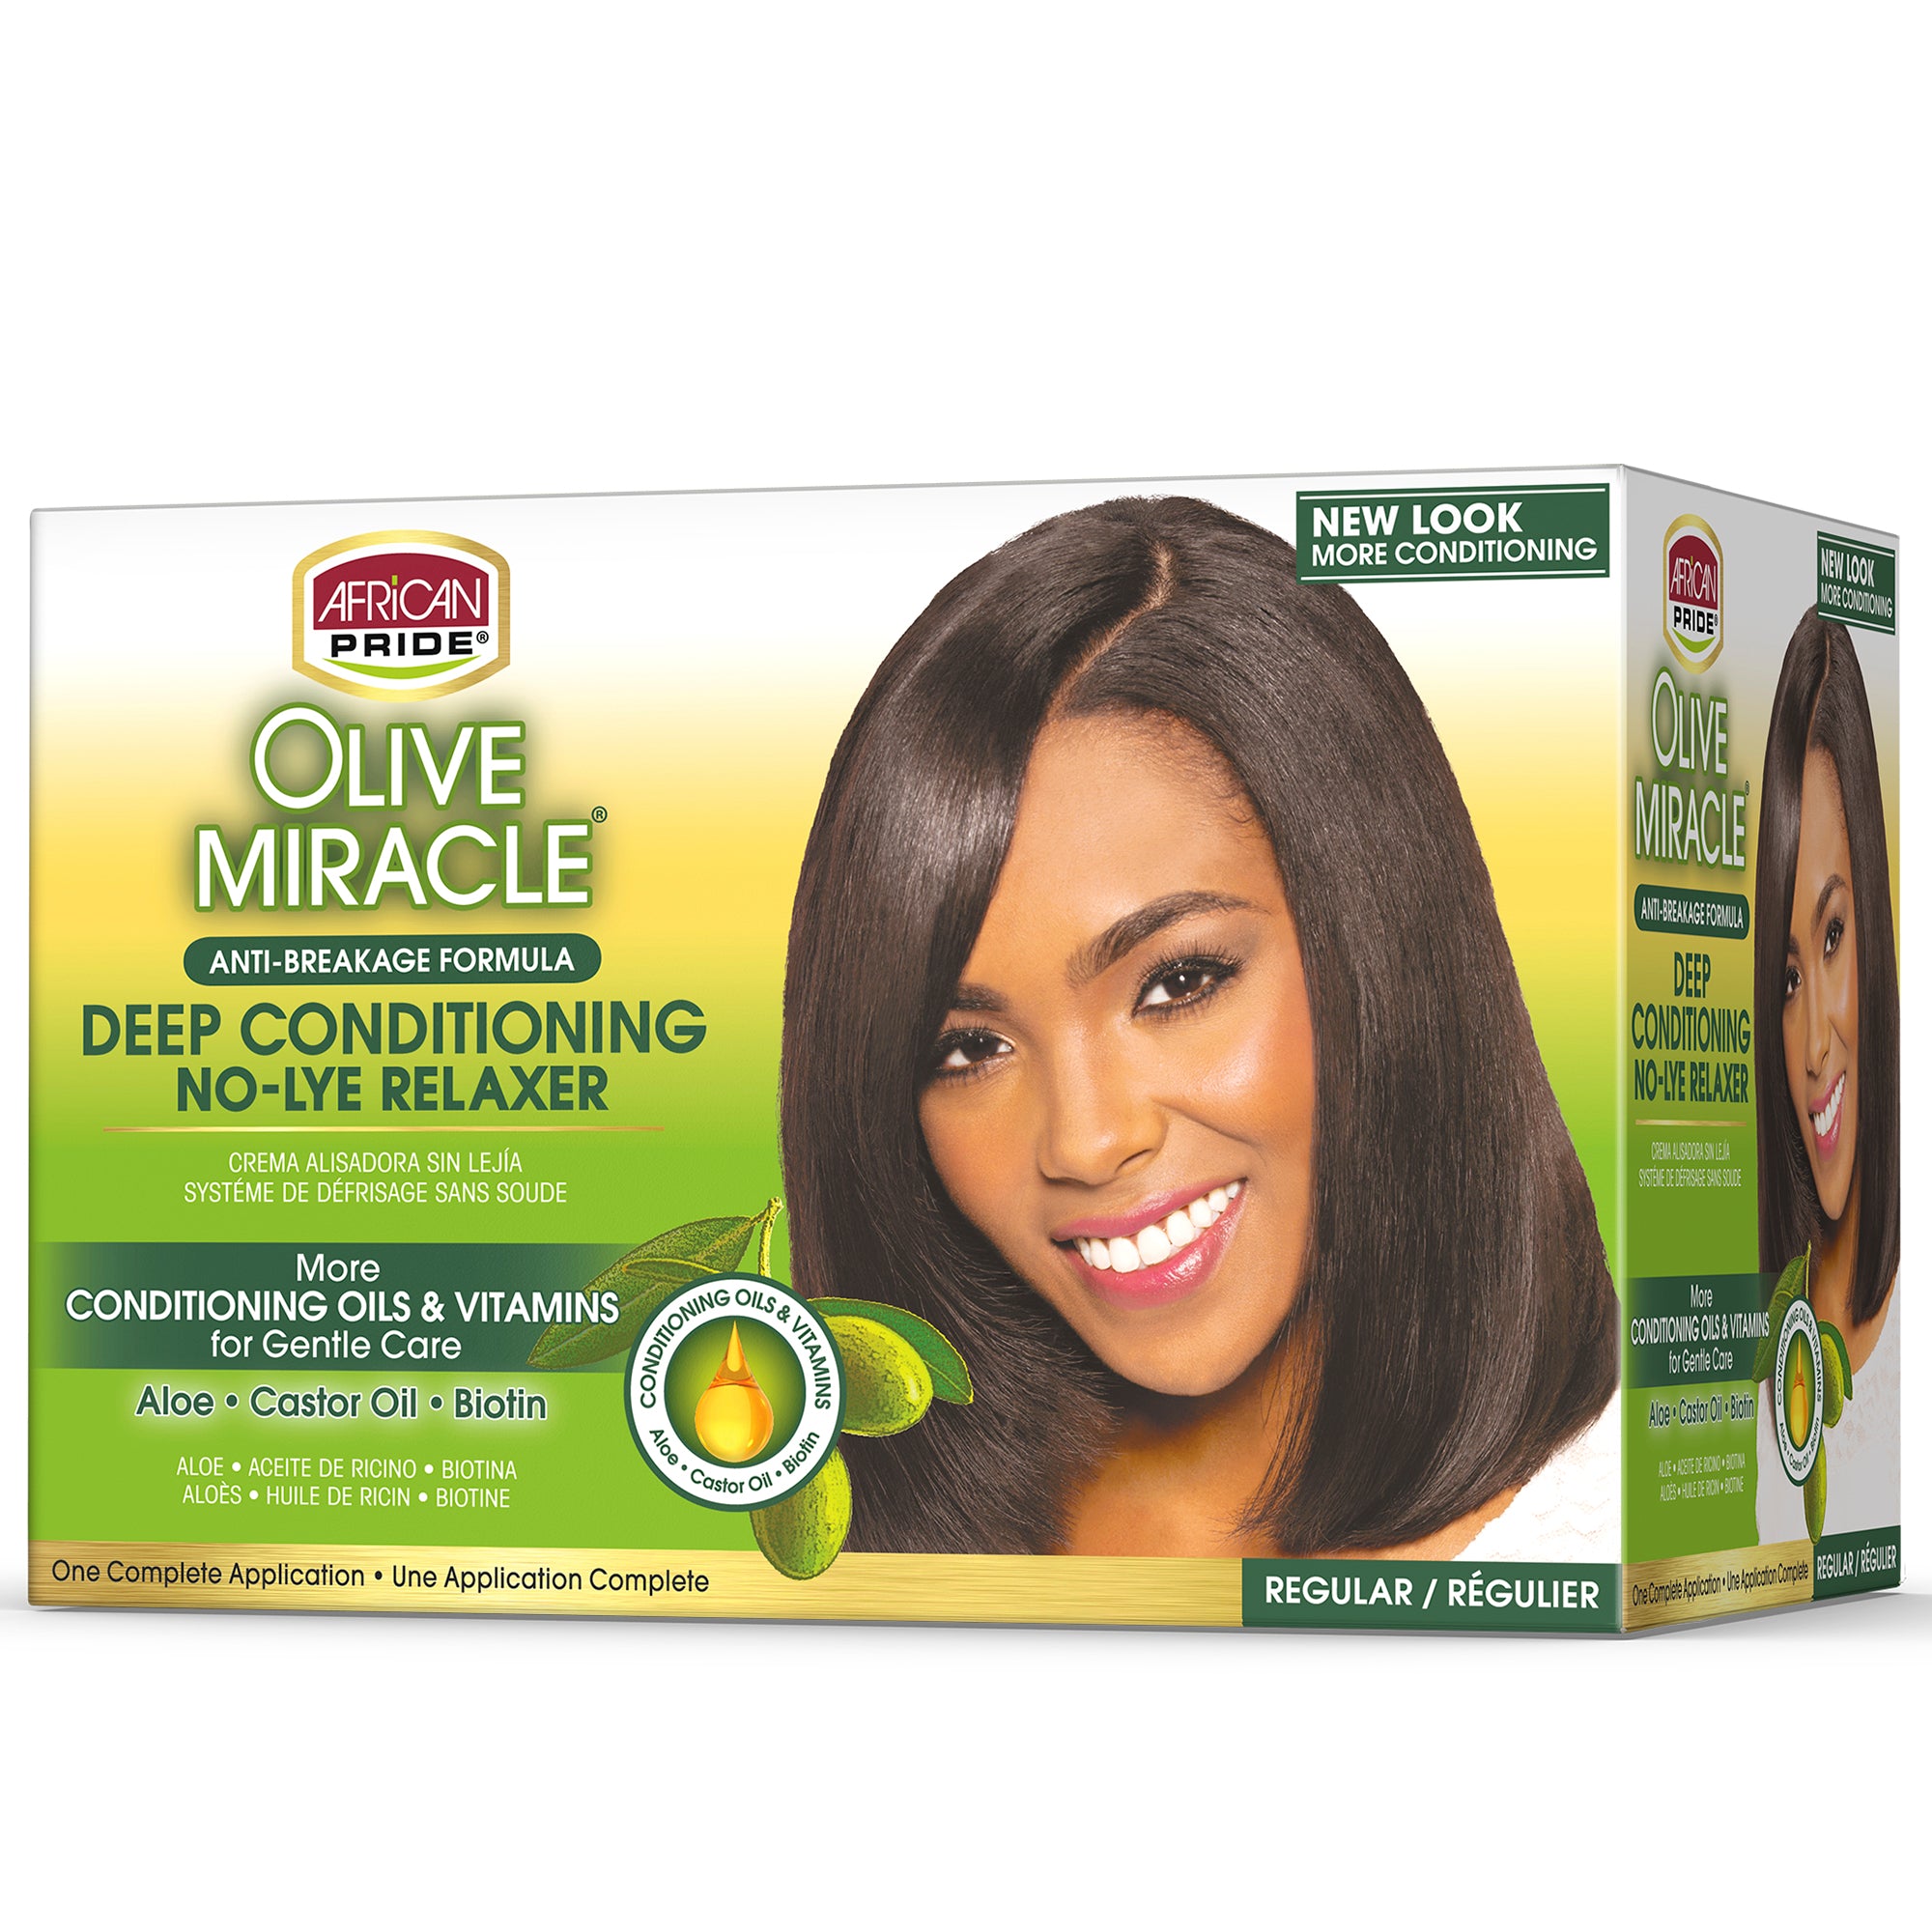 African Pride Olive Miracle Deep Conditioning Anti-Breakage No-Lye Relaxer - 1 Application